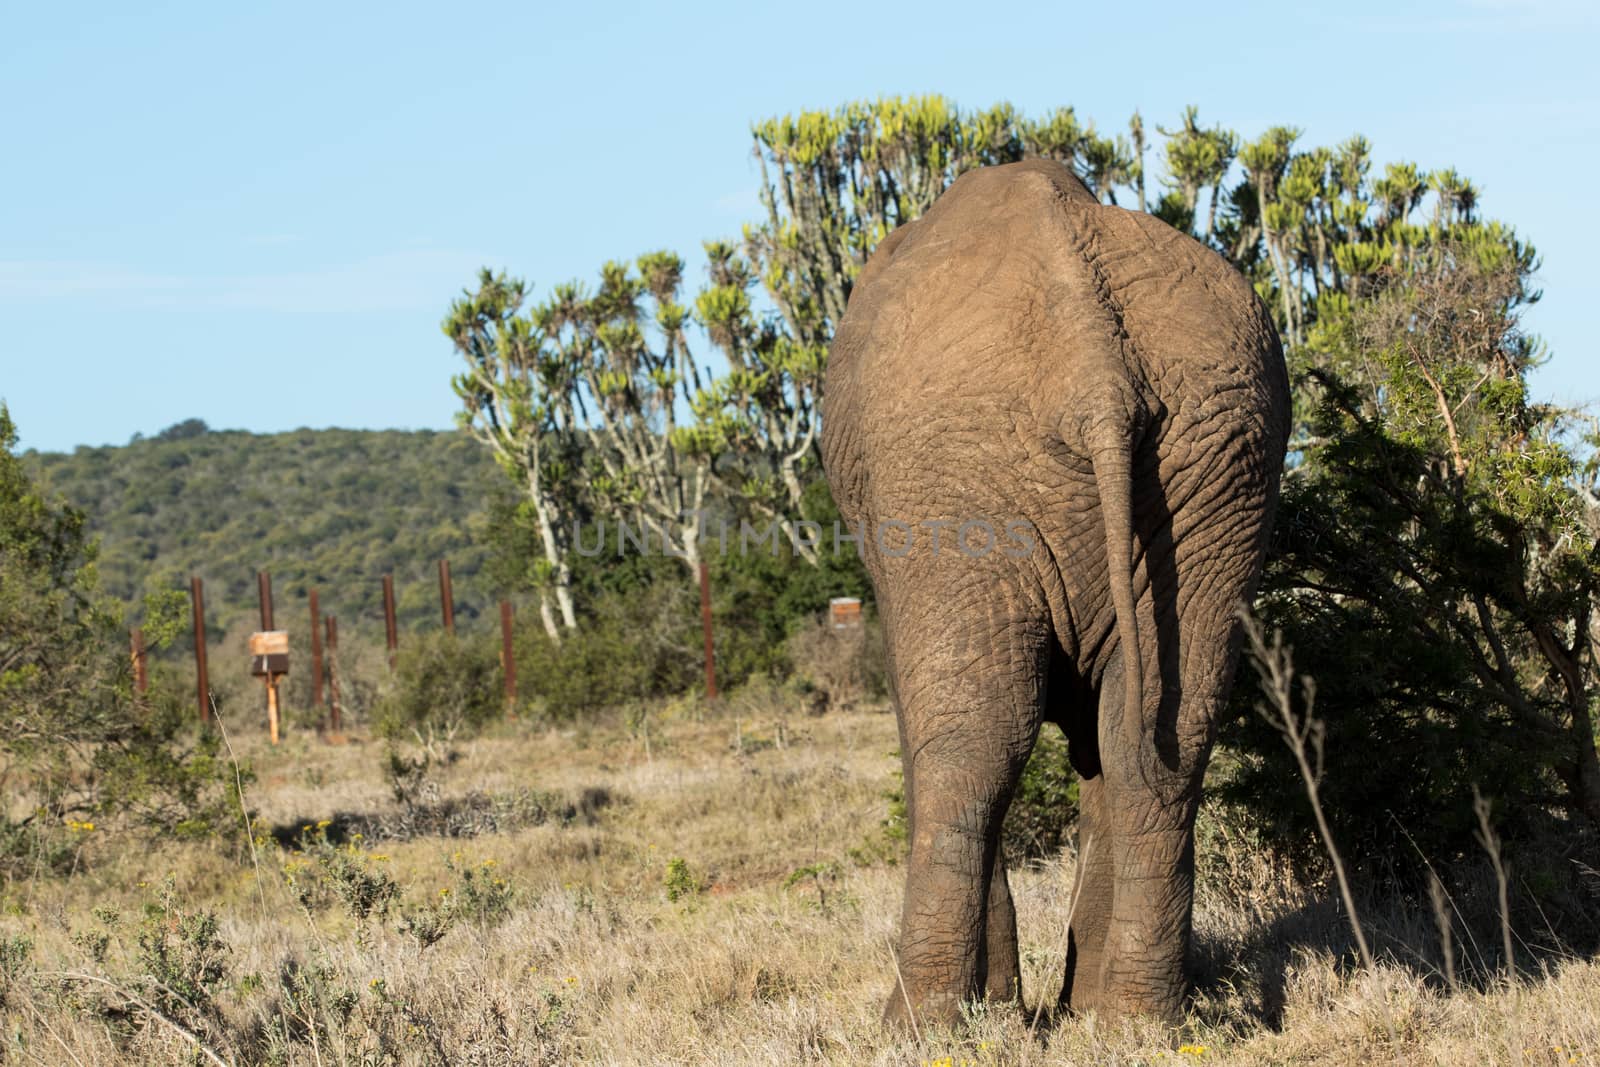 Backside of an Elephant standing at the bushes in the field.